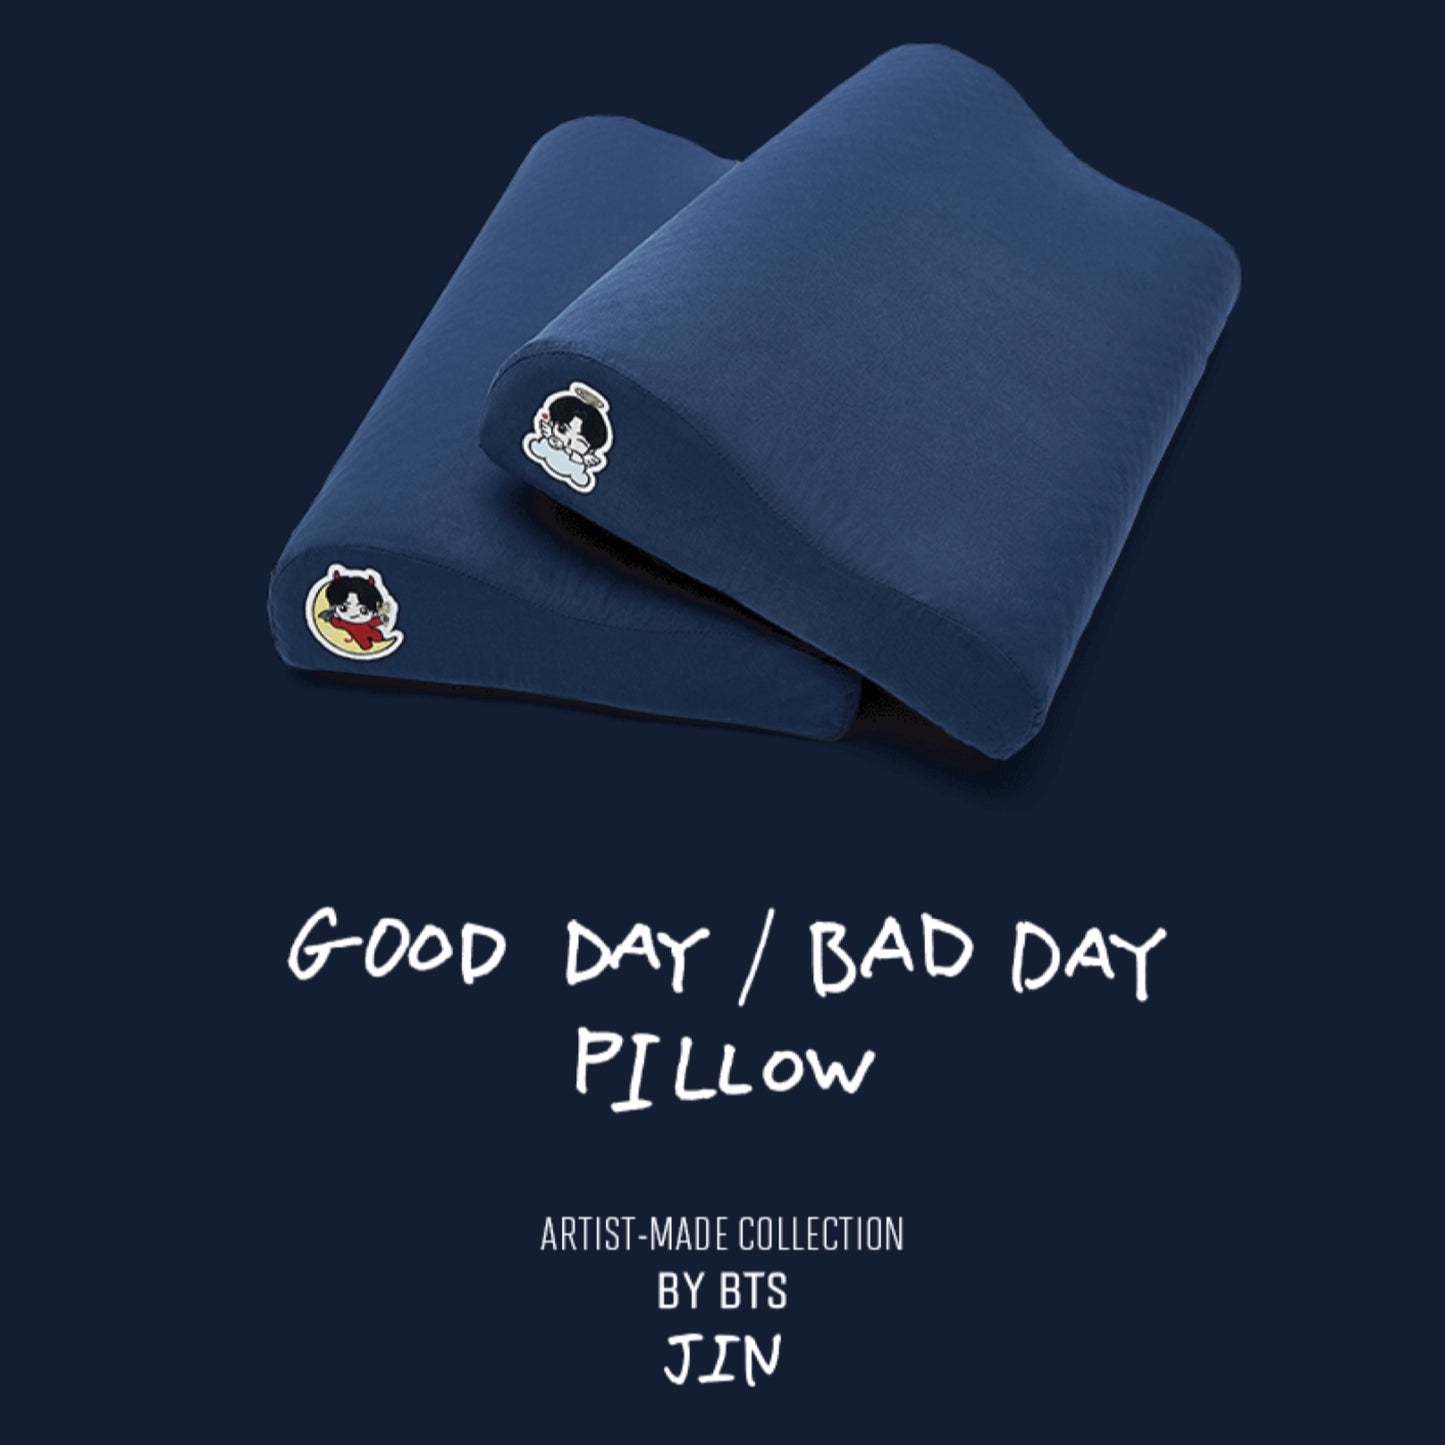 BTS | ARTIST-MADE COLLECTION BY BTS | Jin - PILLOW (GOOD DAY)